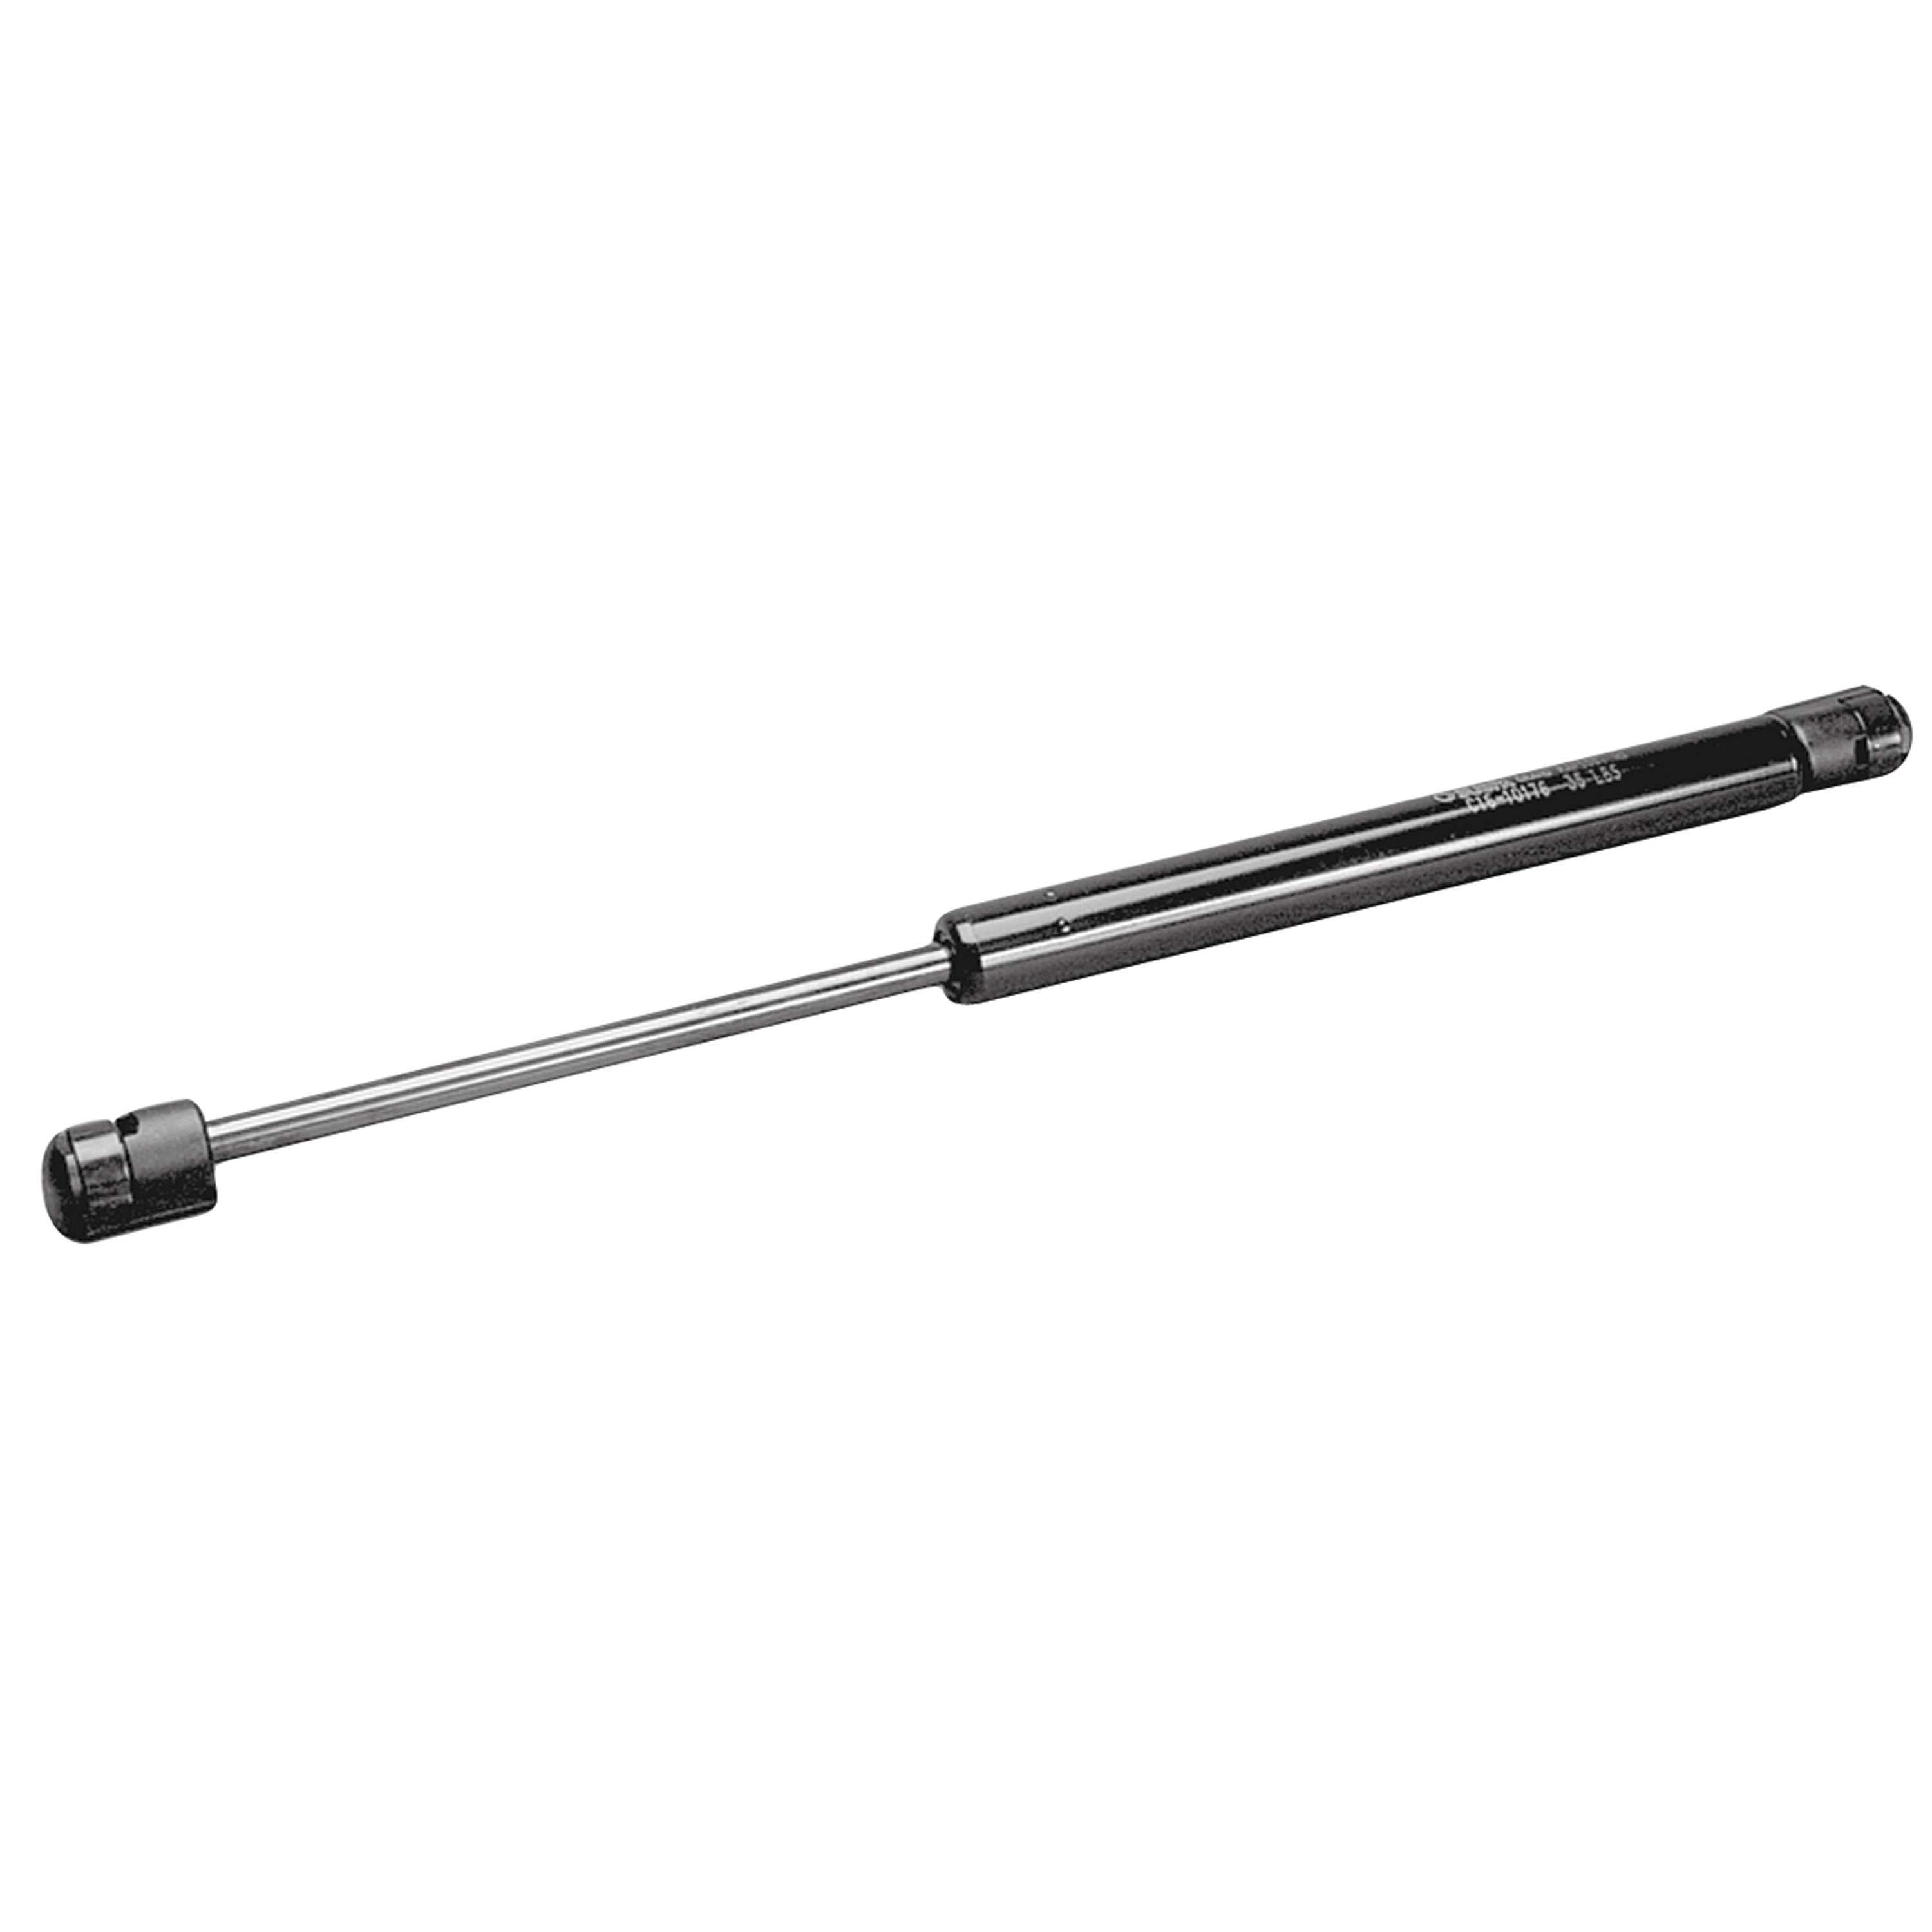 AP Products 010-050 Gas Prop - 17.13" Extended, 6.30" Stroke, 60 lbs.